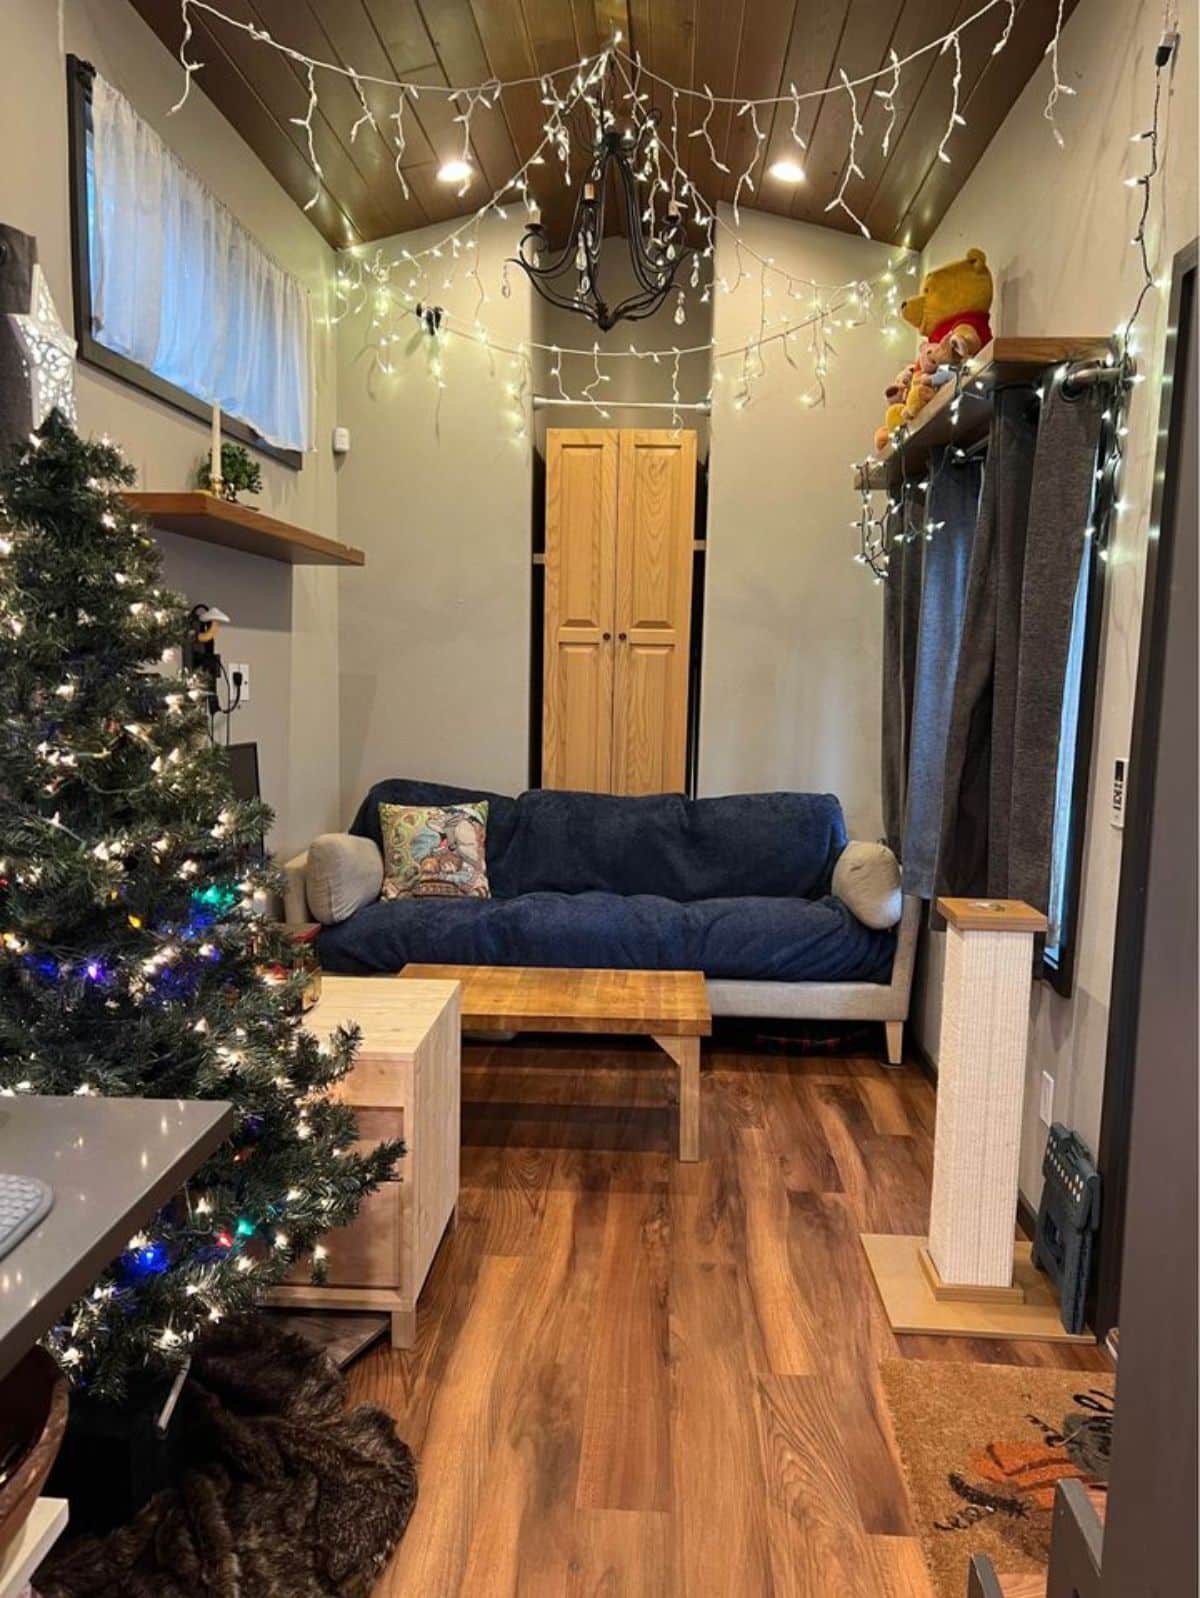 Amazing interiors of Tiny Home Has Two Bedrooms